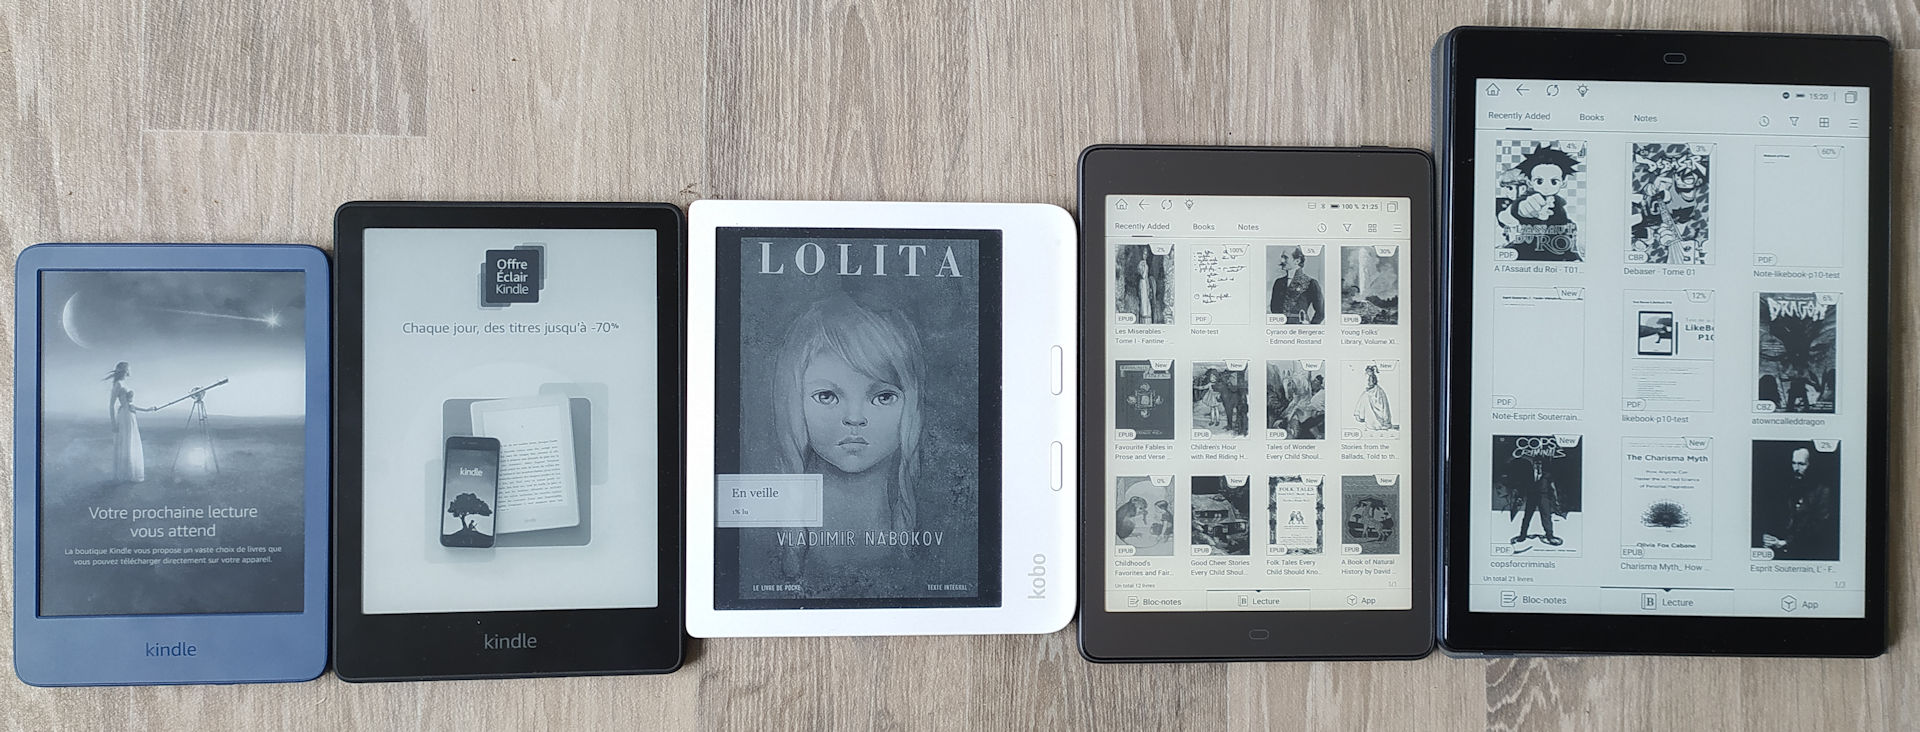 e-readers with different screen size